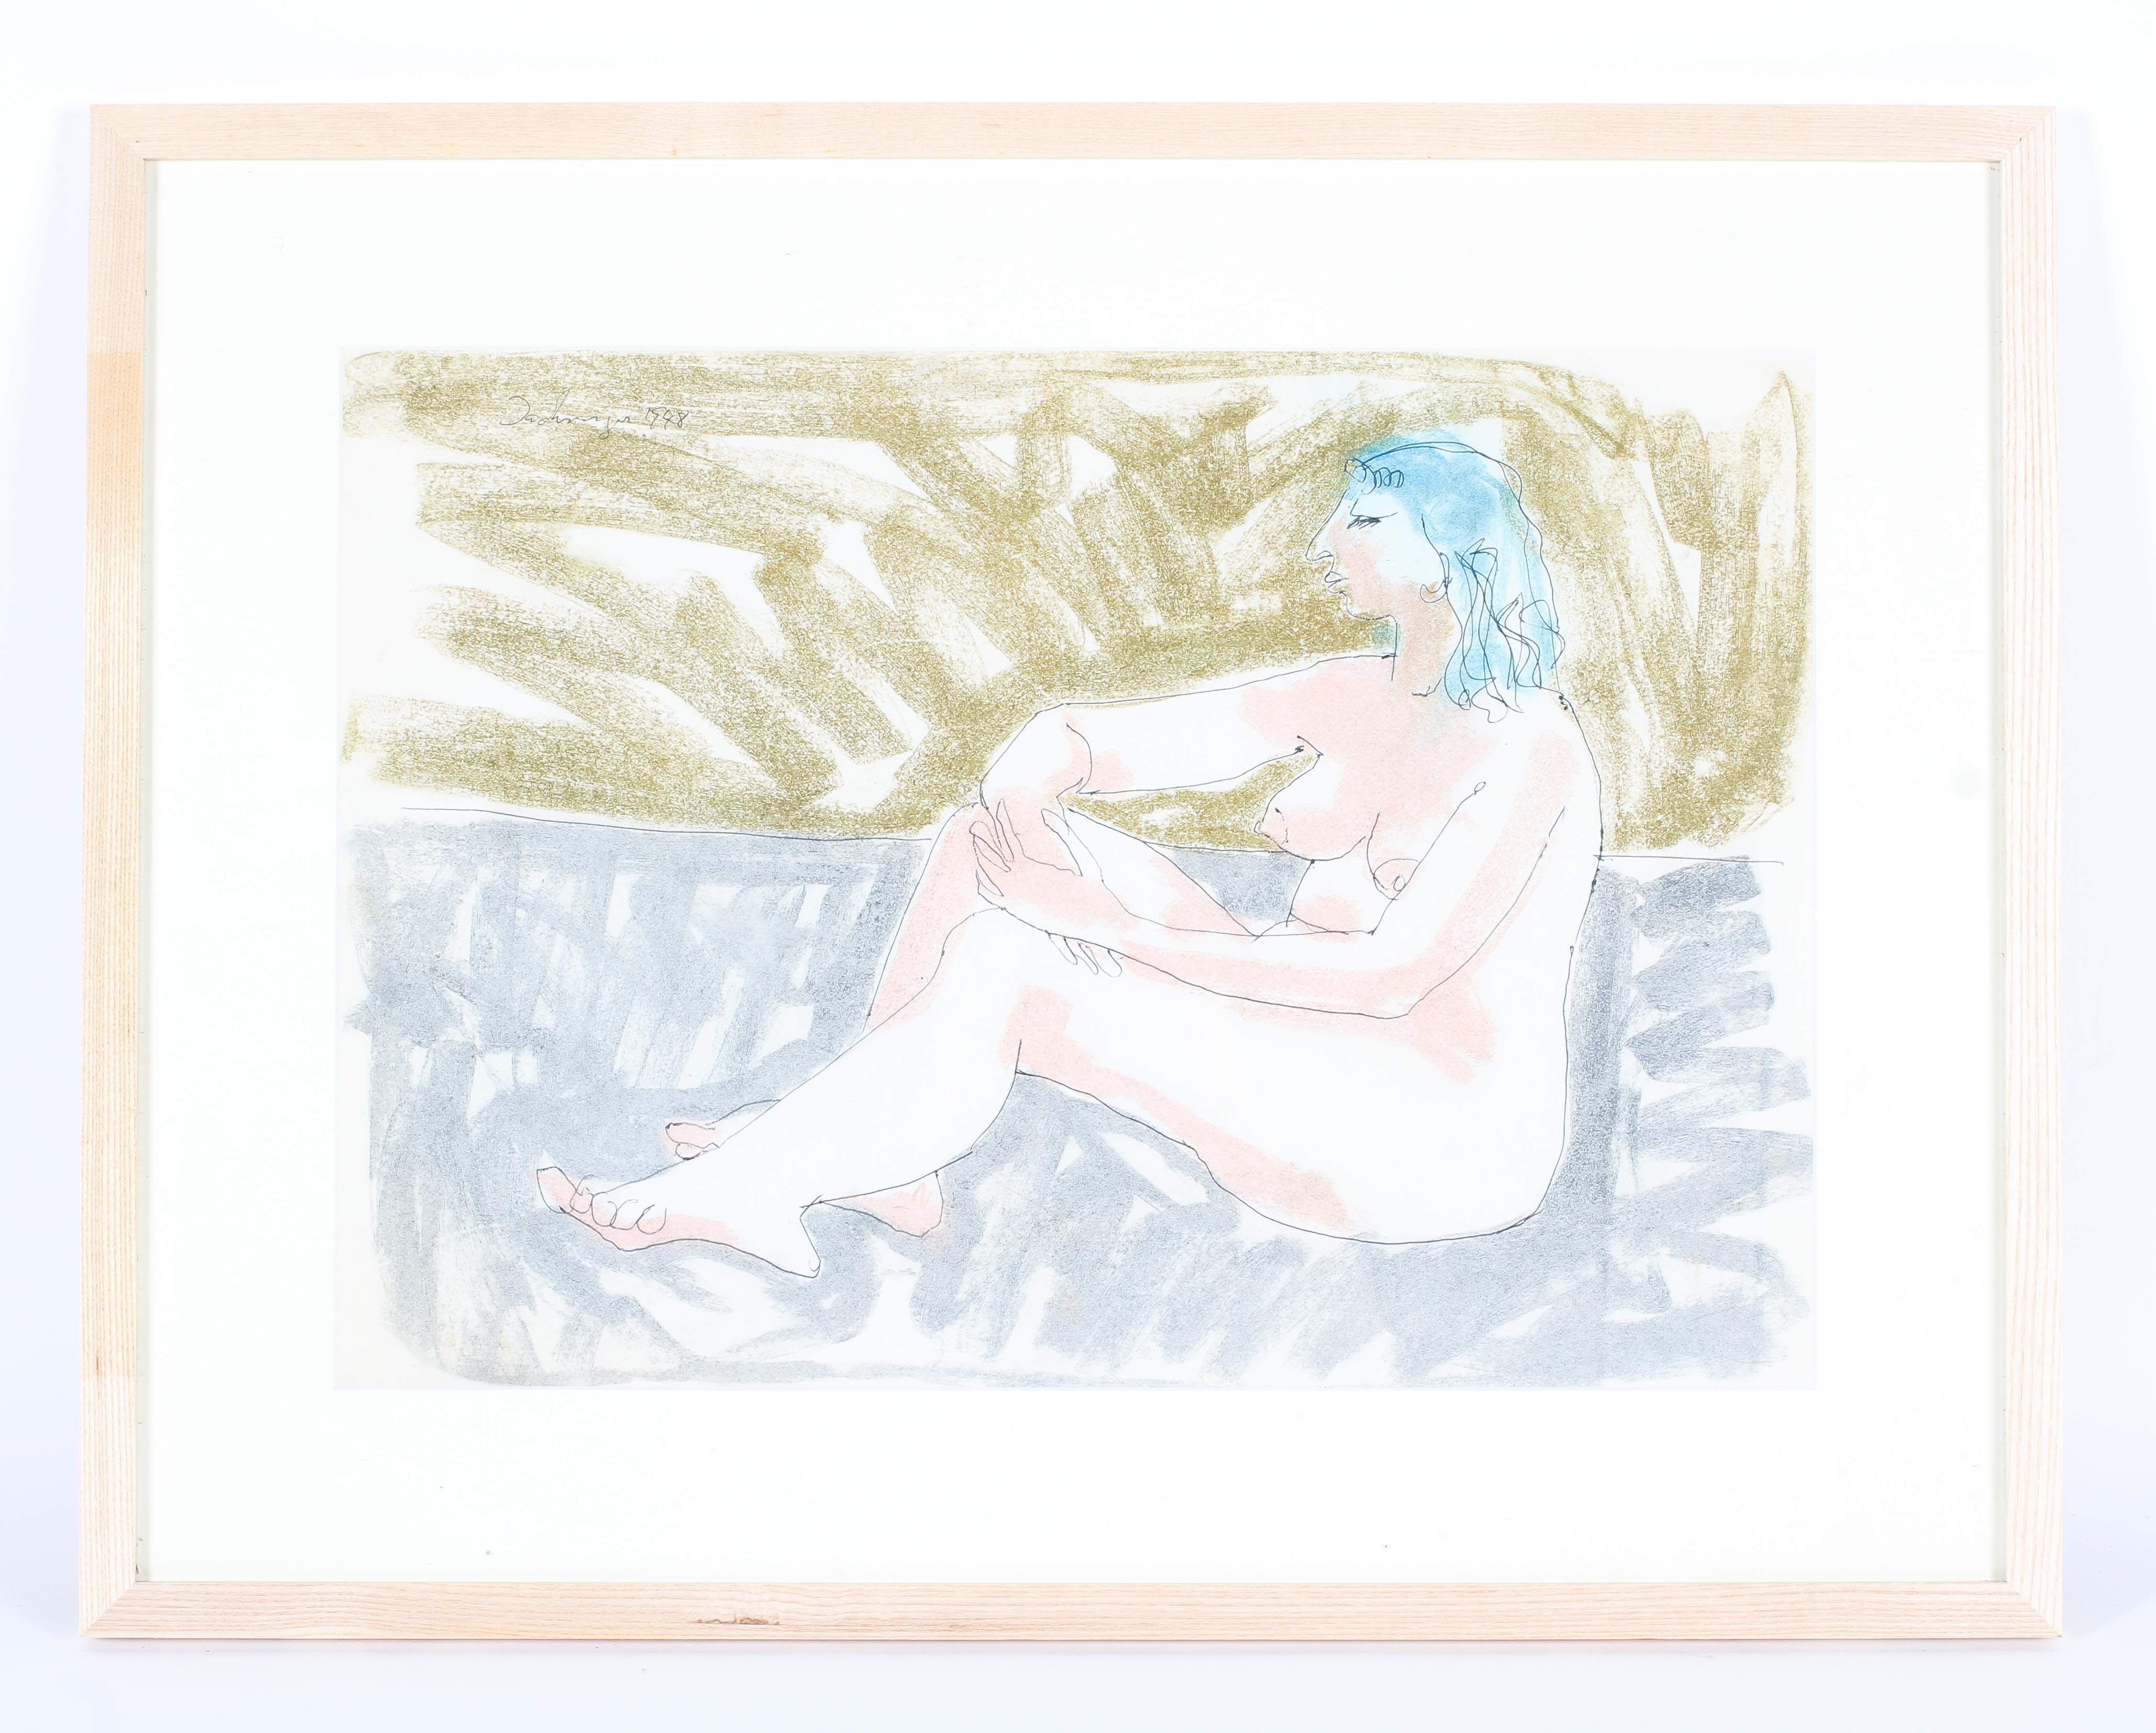 Hugo Dachinger (1908-1996), Seated Female Nude, pen, chalks and wash on paper.